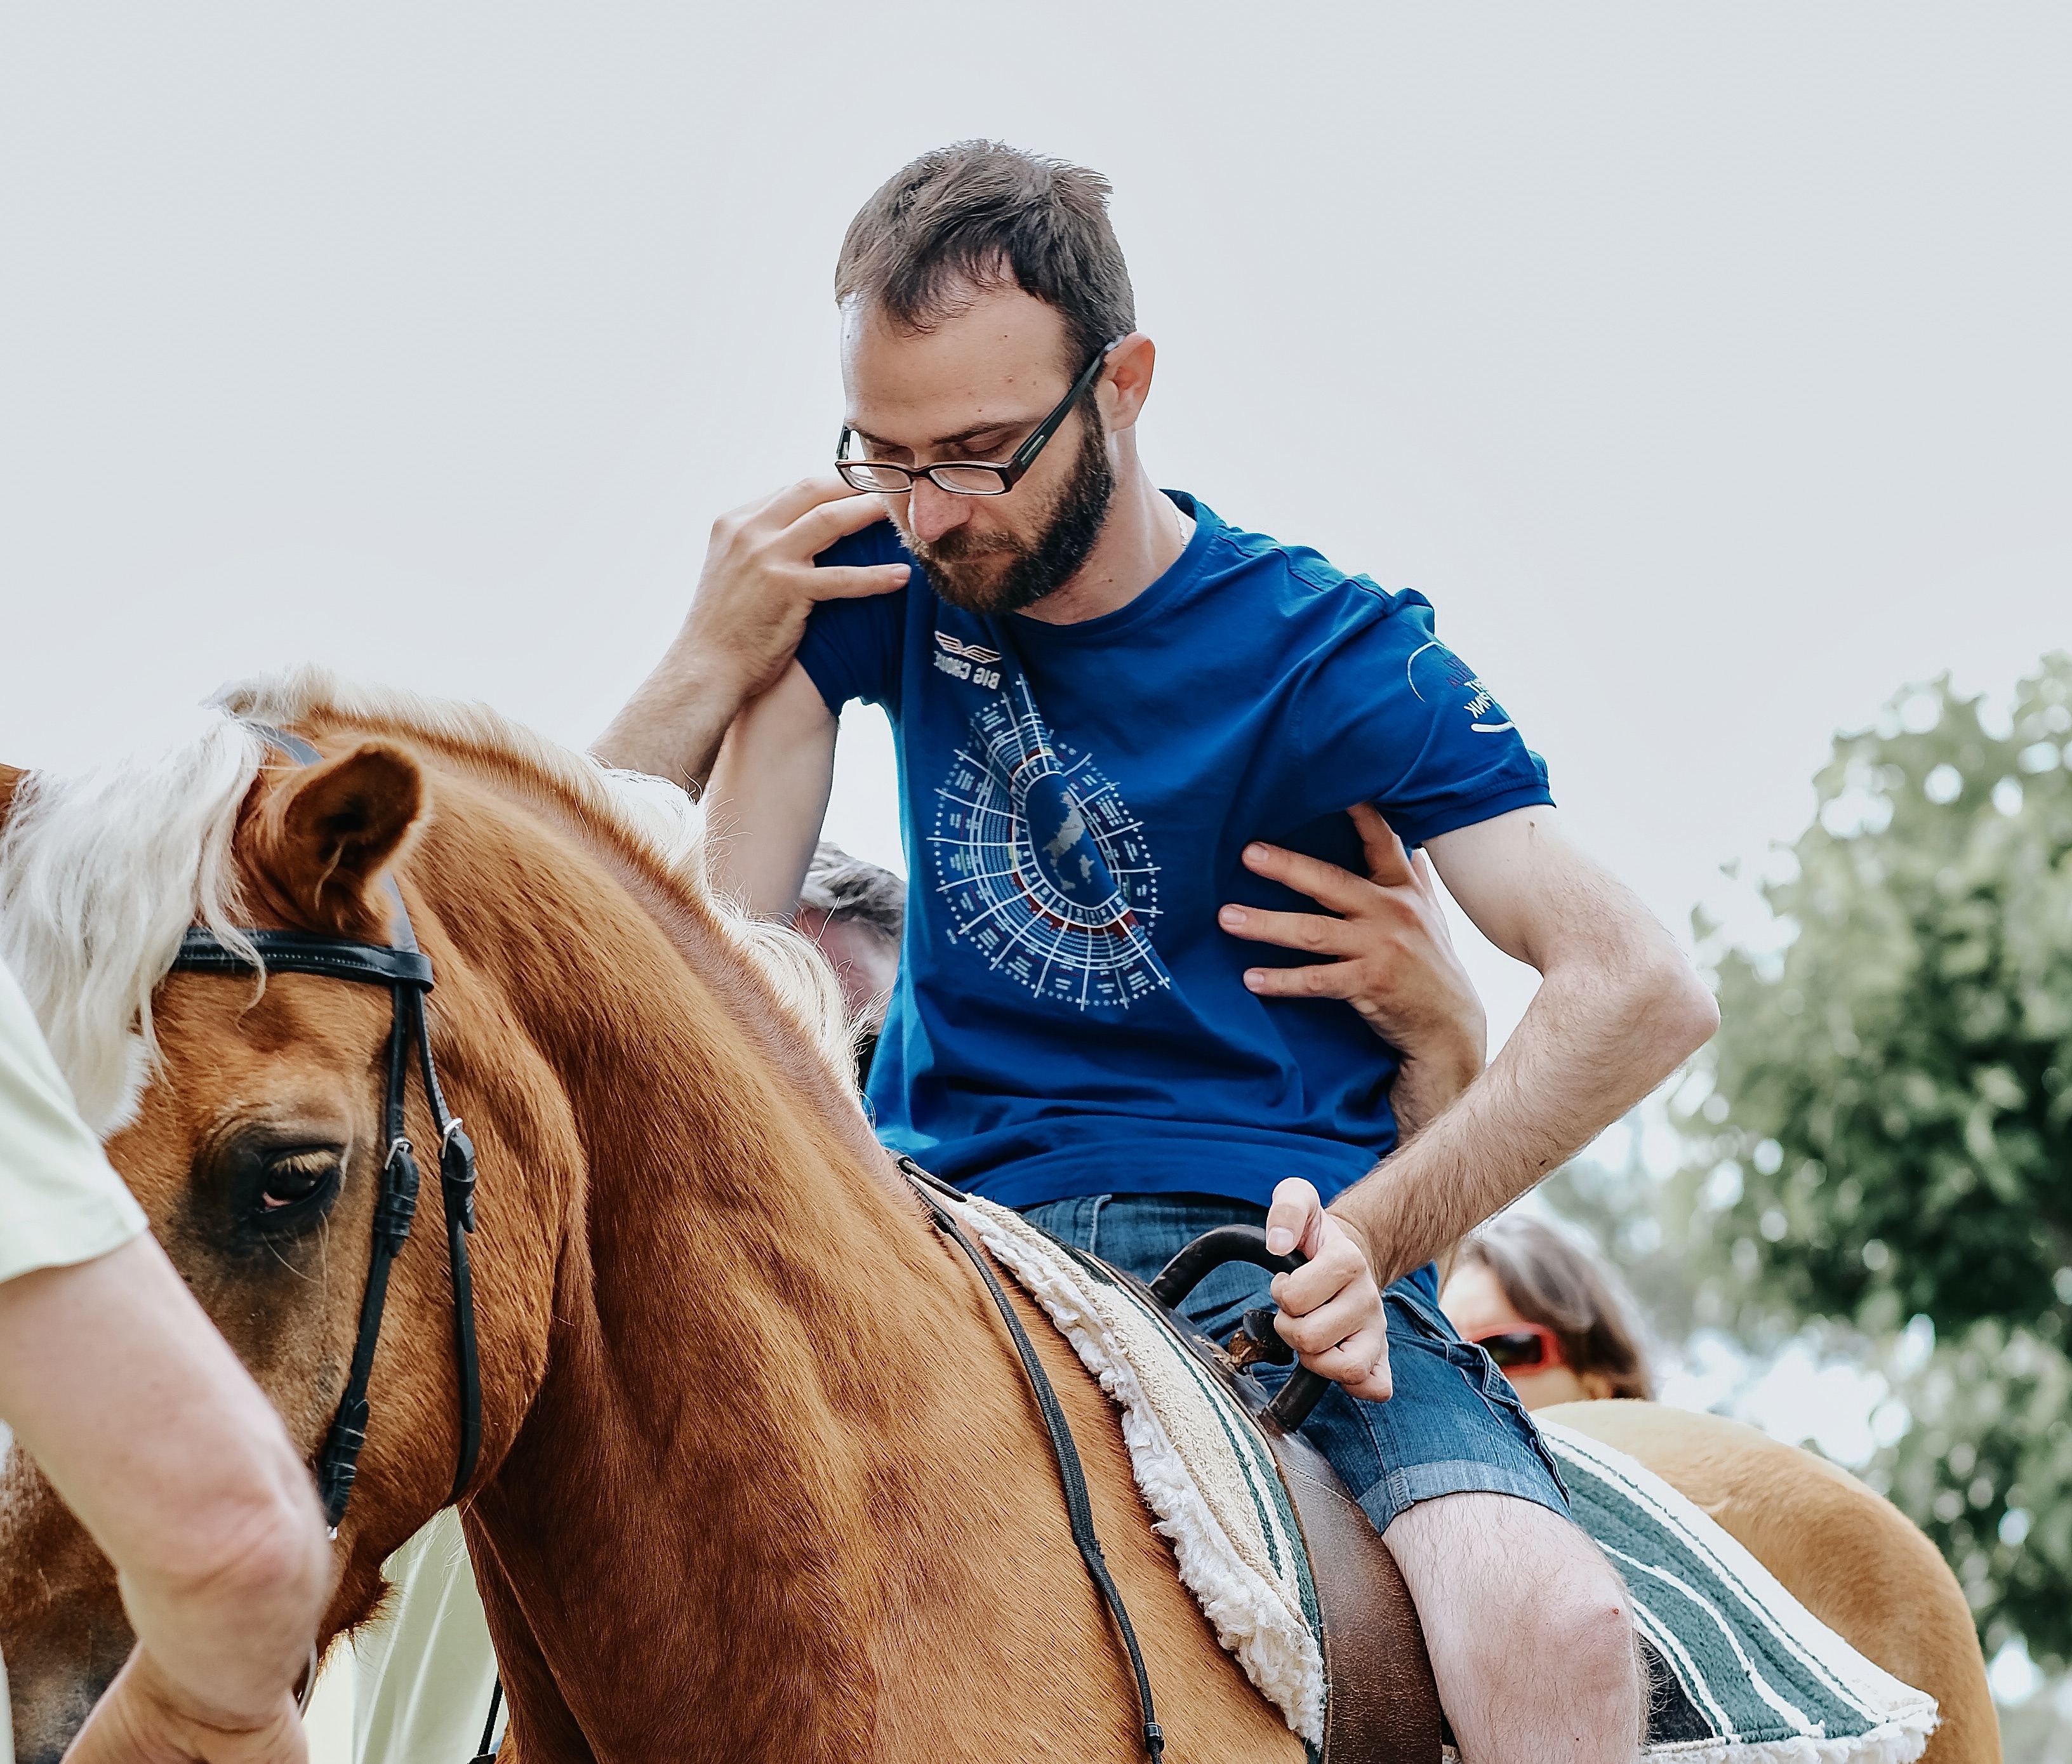 cover. Mobility impaired man on a horse. Hands of other people support him.